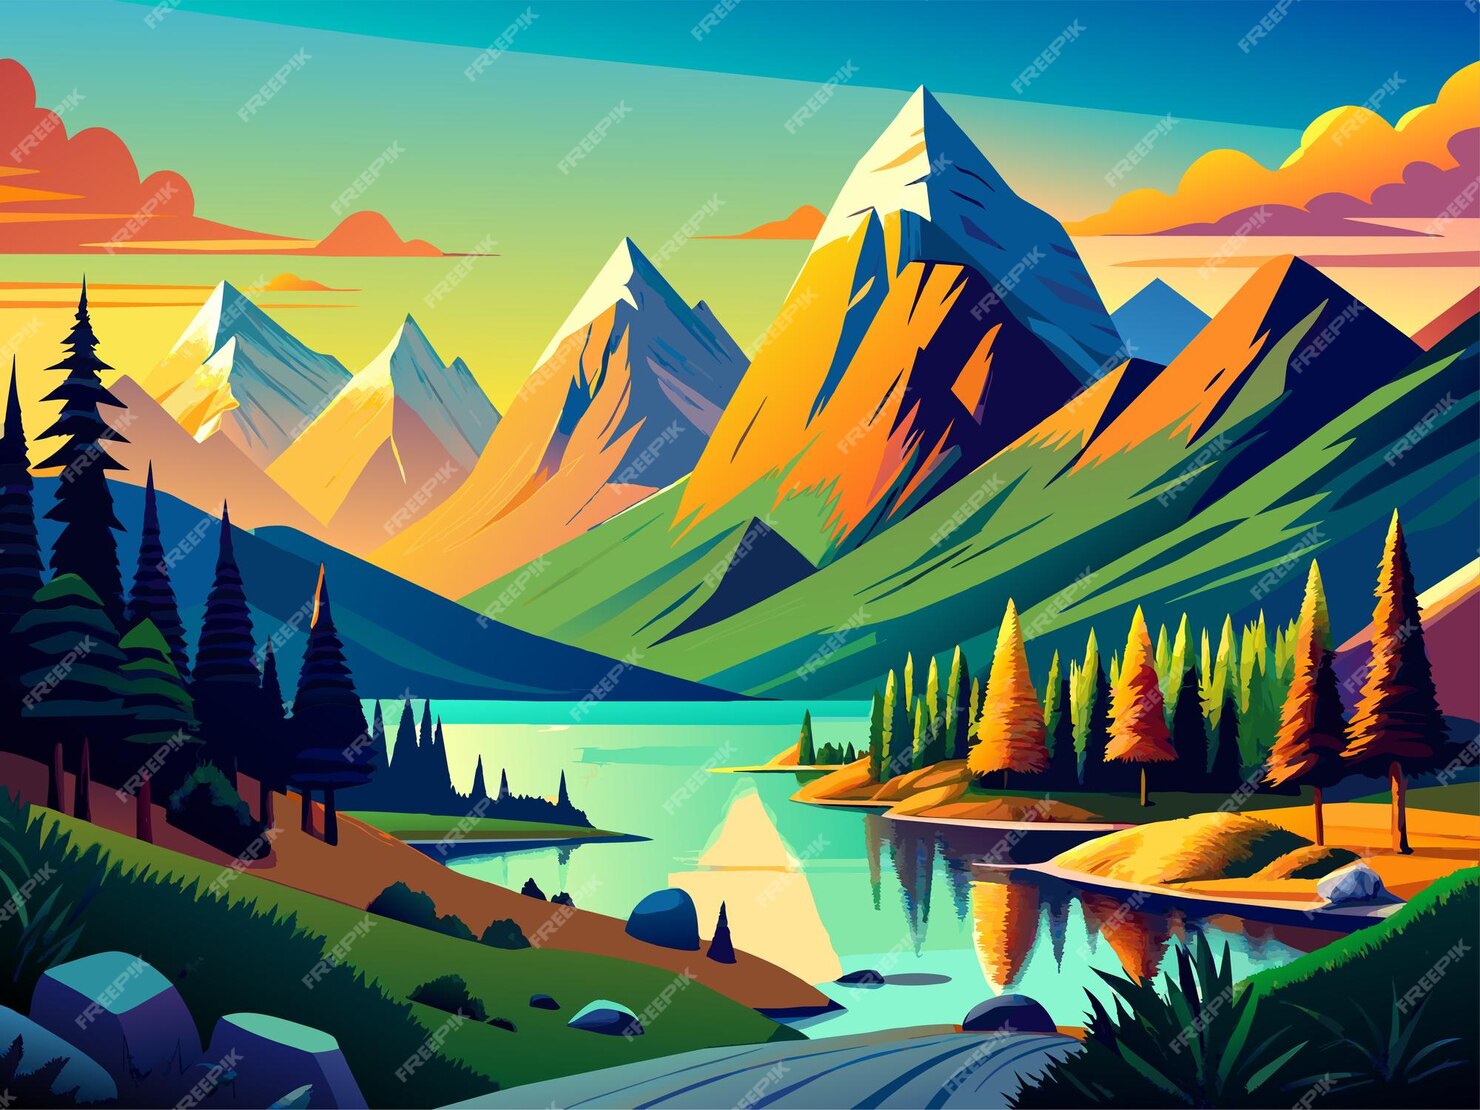 Premium Vector | Hand drawn landscape with mountains vector llustration